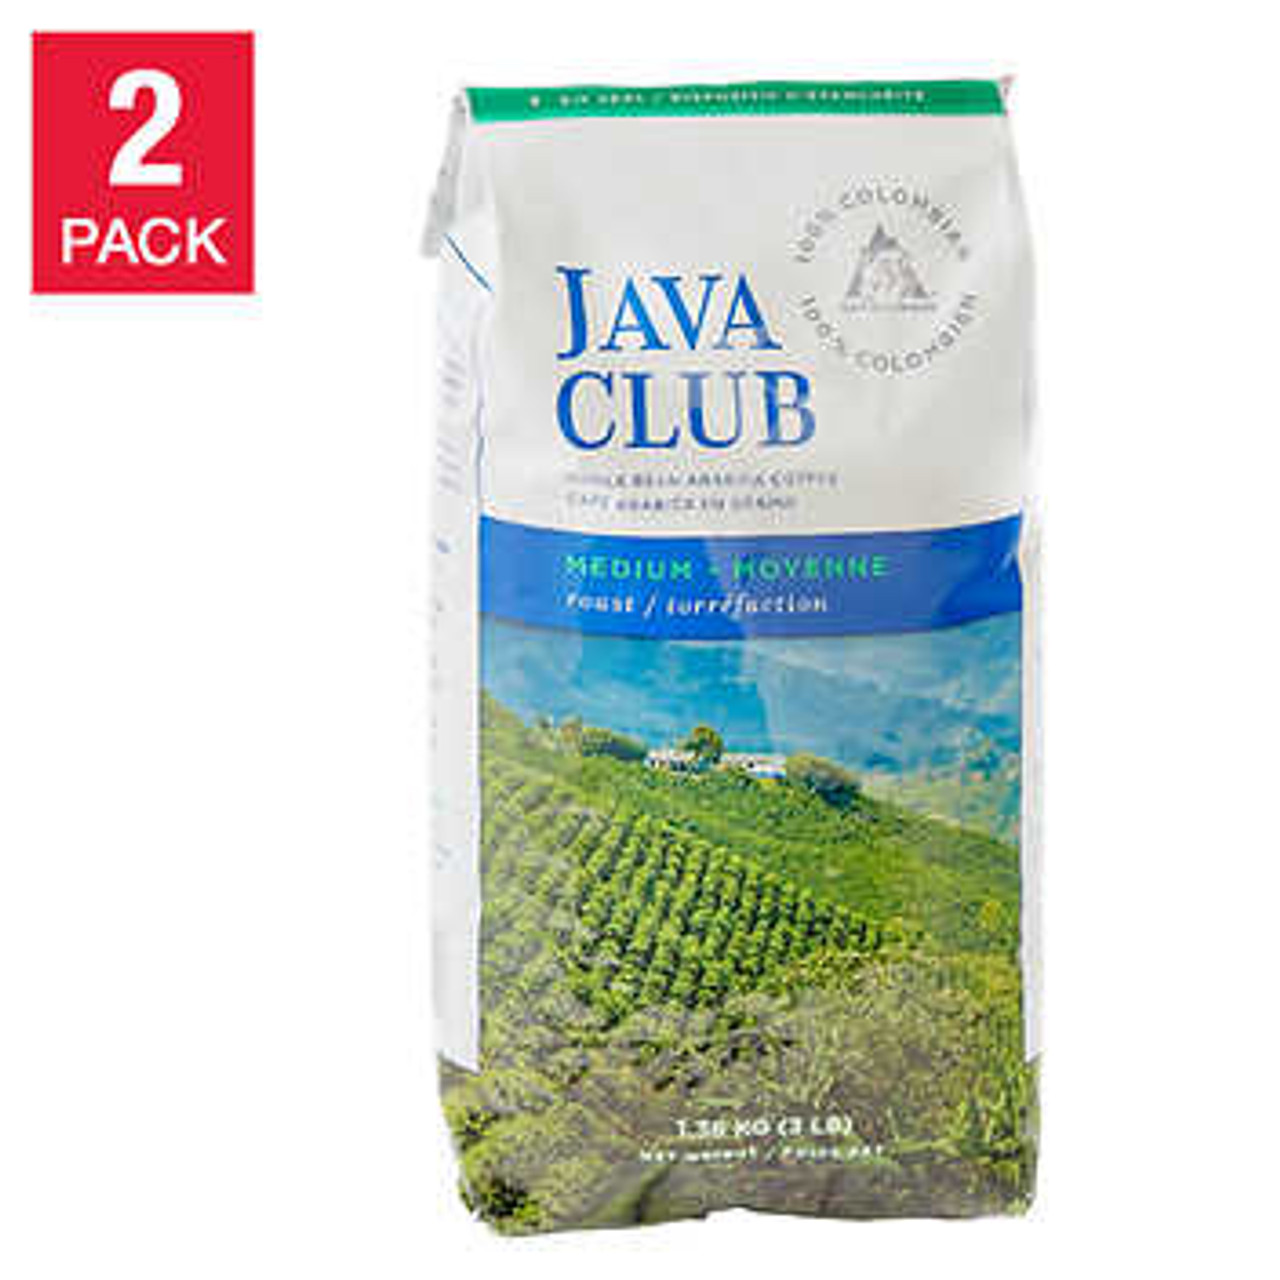 Java Club 100% Colombian Whole Bean Arabica Coffee - 2 x 1.36 kg - Pure Colombian Excellence in Every Cup- Chicken Pieces